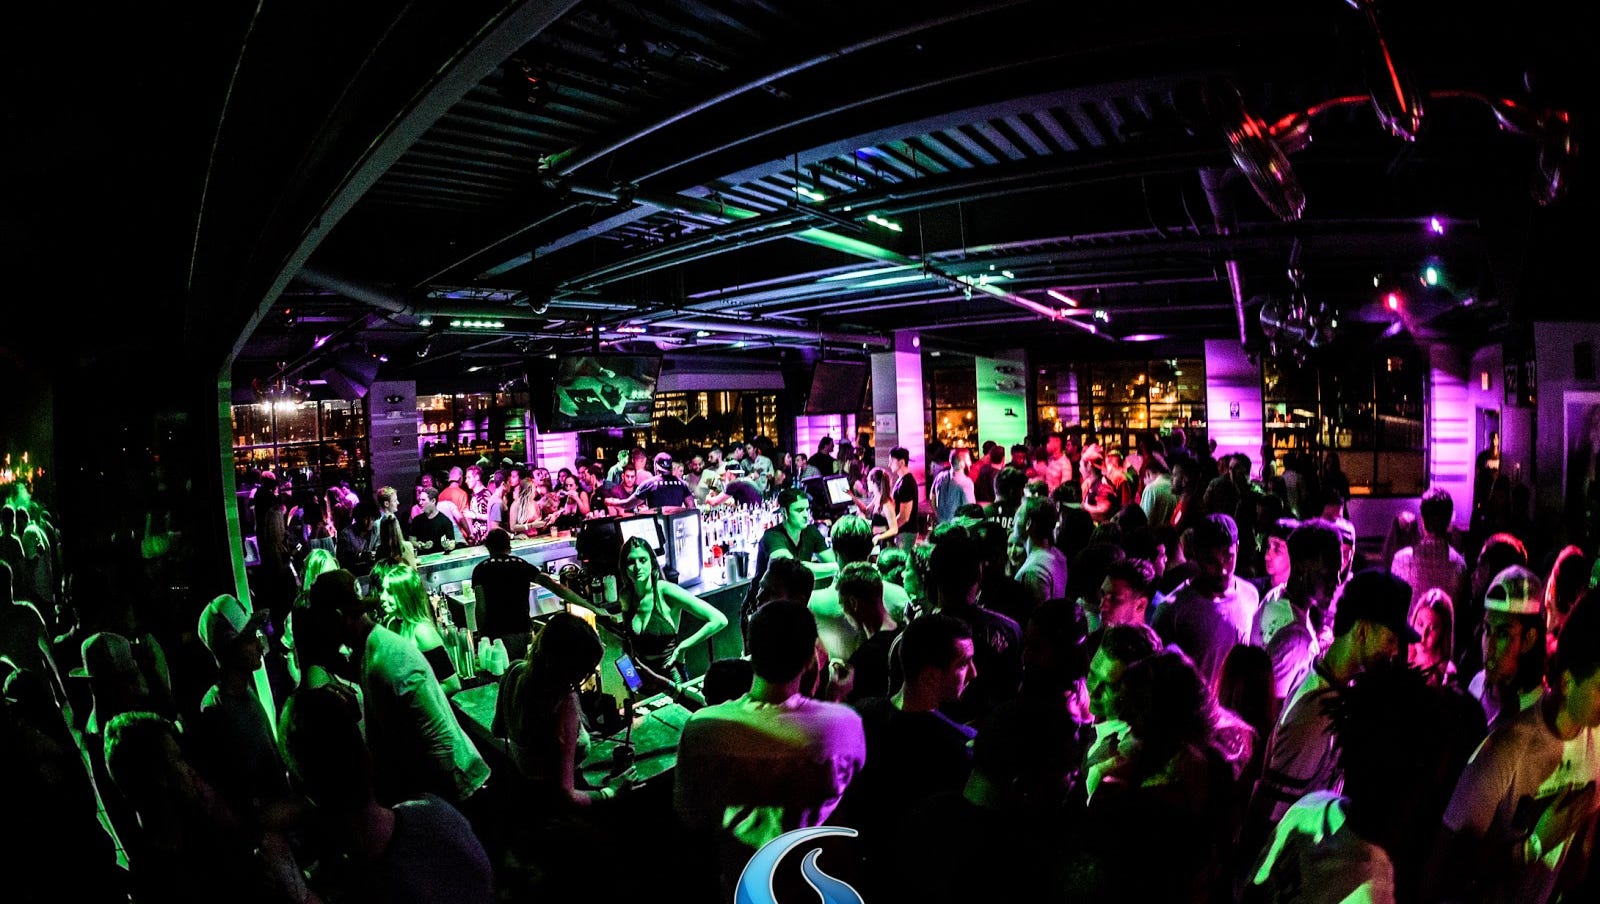 Top 5 bars and clubs for the 18+ plus crowd